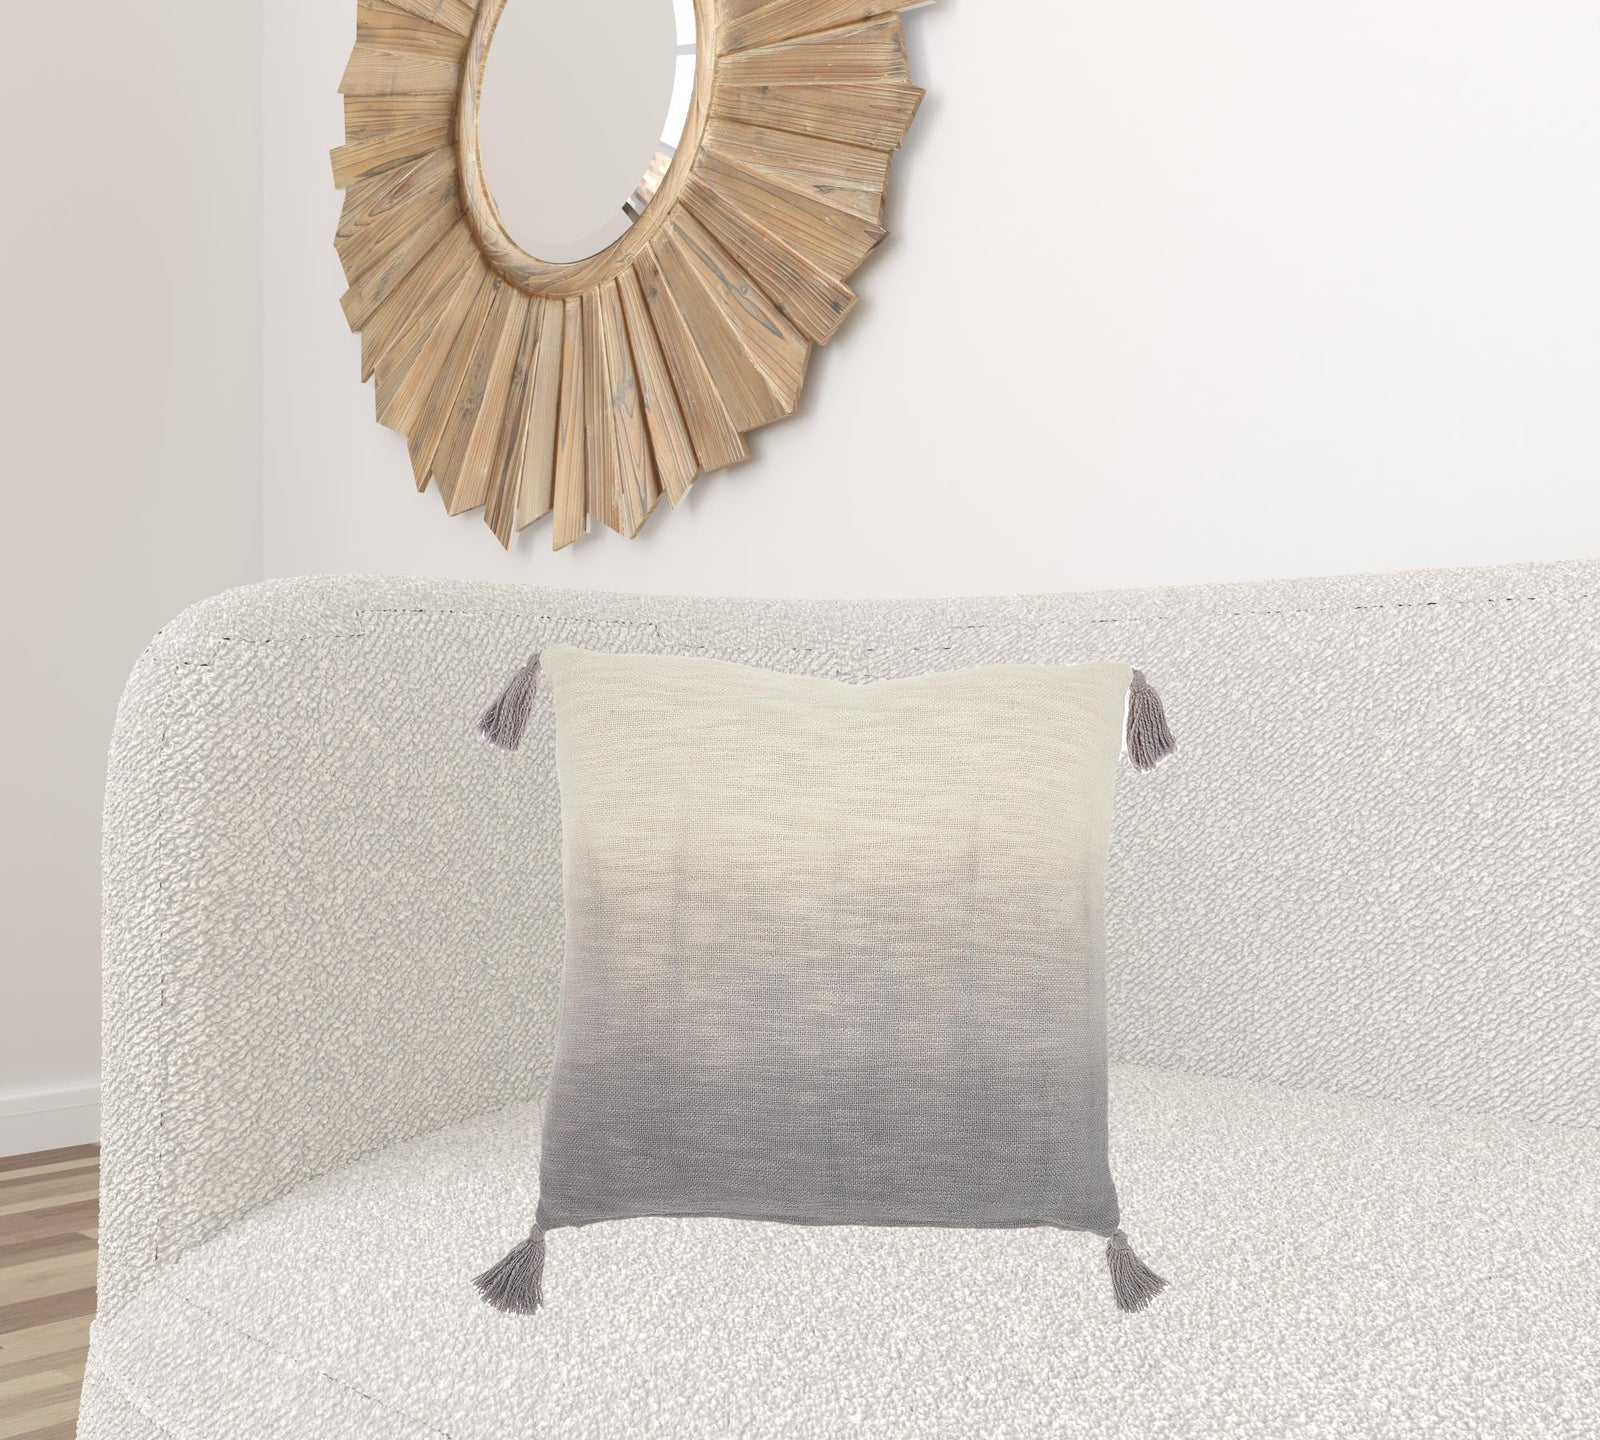 Gray Ombre Tasseled Throw Pillow